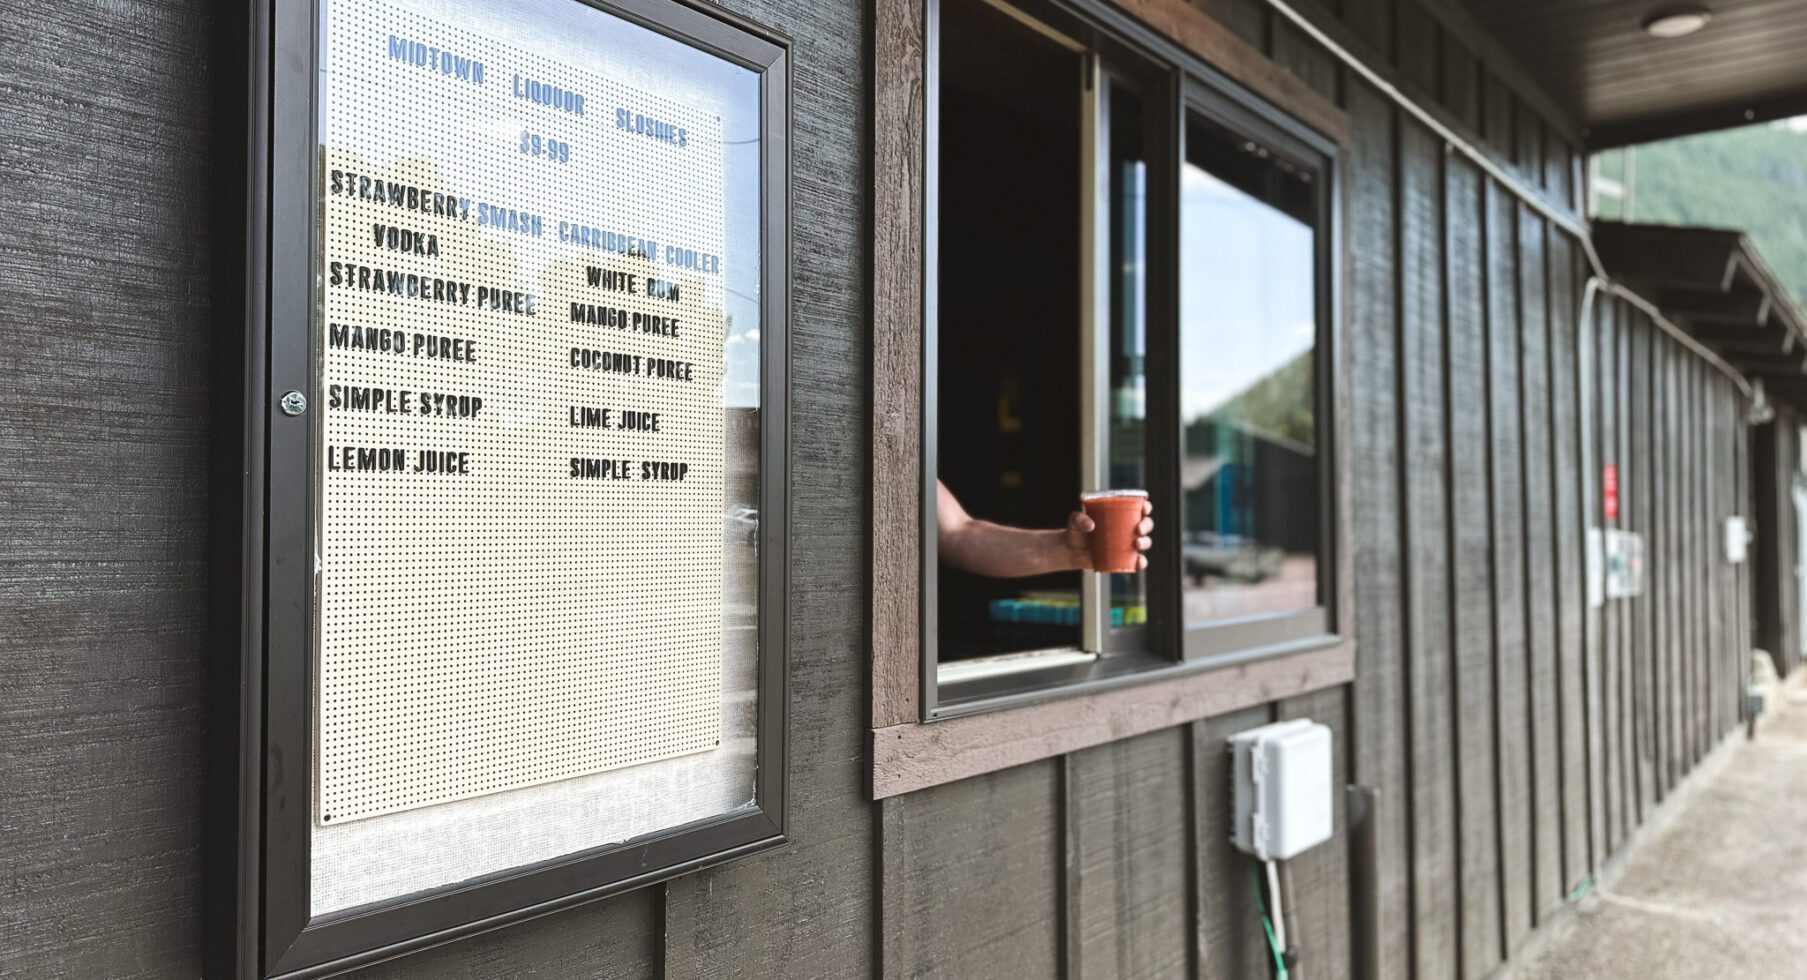 From the counter window, a hand holding a coffee mug is visible, with a nearby menu card.